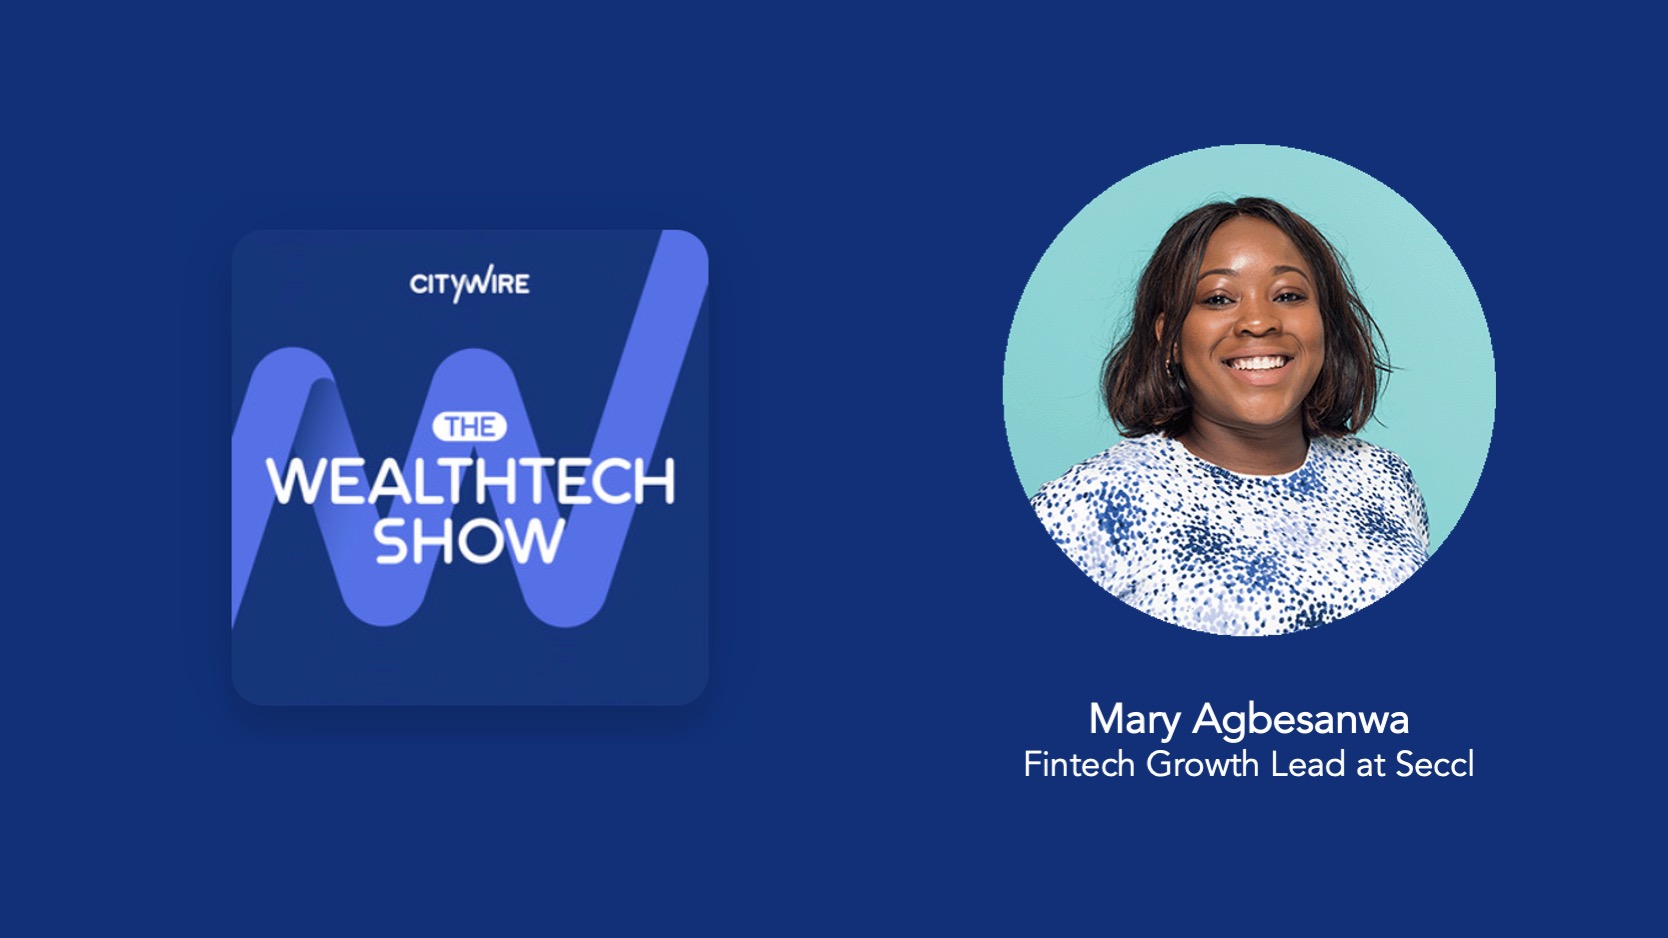 Citywire WealthTech Show - 'The frontier of innovation': How fintech is changing our financial lives